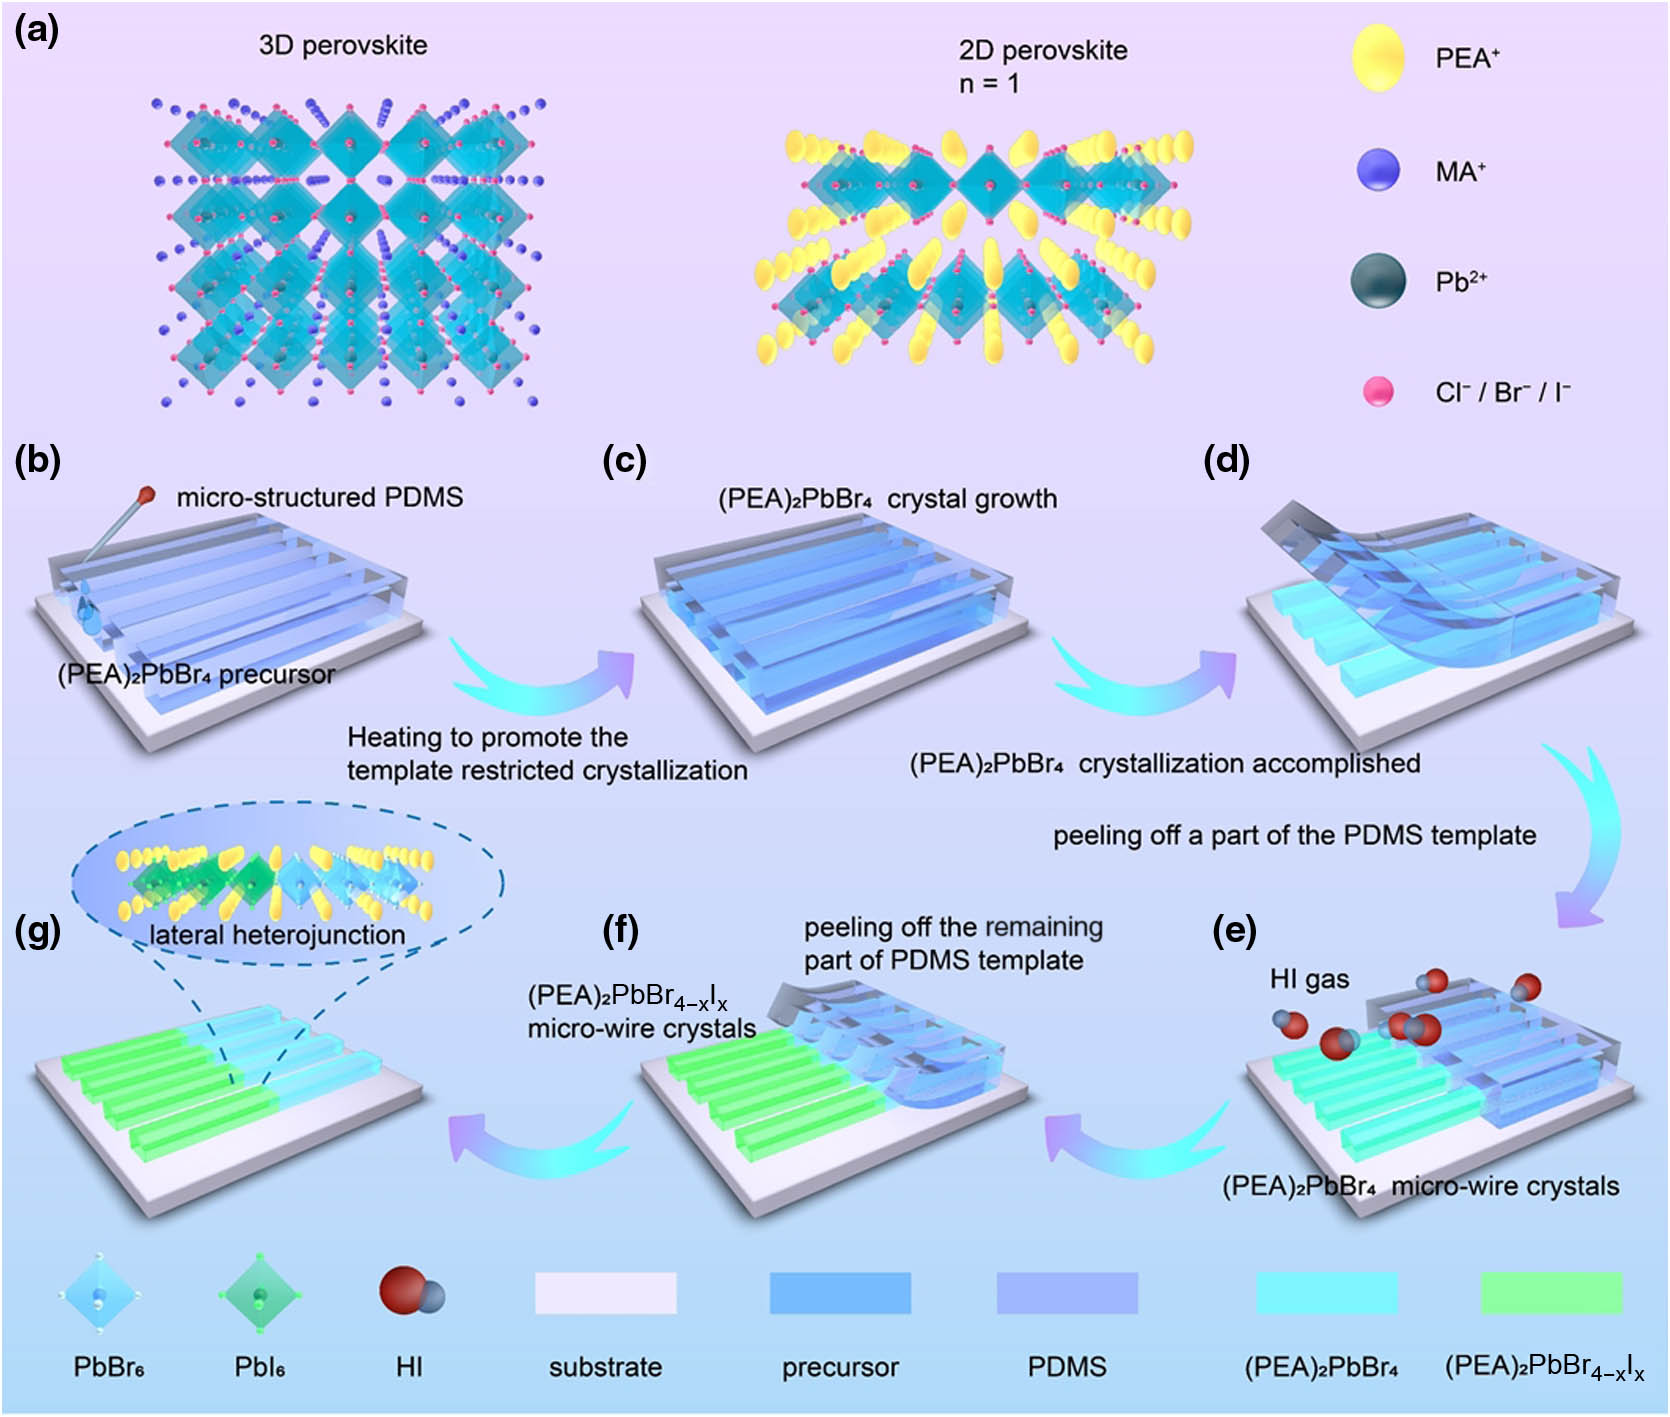 (a) Schematic diagram of 3D perovskite and 2D Ruddlesden–Popper perovskite structures; (b)–(d) schematic diagram of process for preparing (PEA)2PbBr4 microwire crystals by imprinting; (e)–(g) regioselective ion exchange preparation of (PEA)2PbBr4–(PEA)2PbBr4−xIx lateral heterojunction.